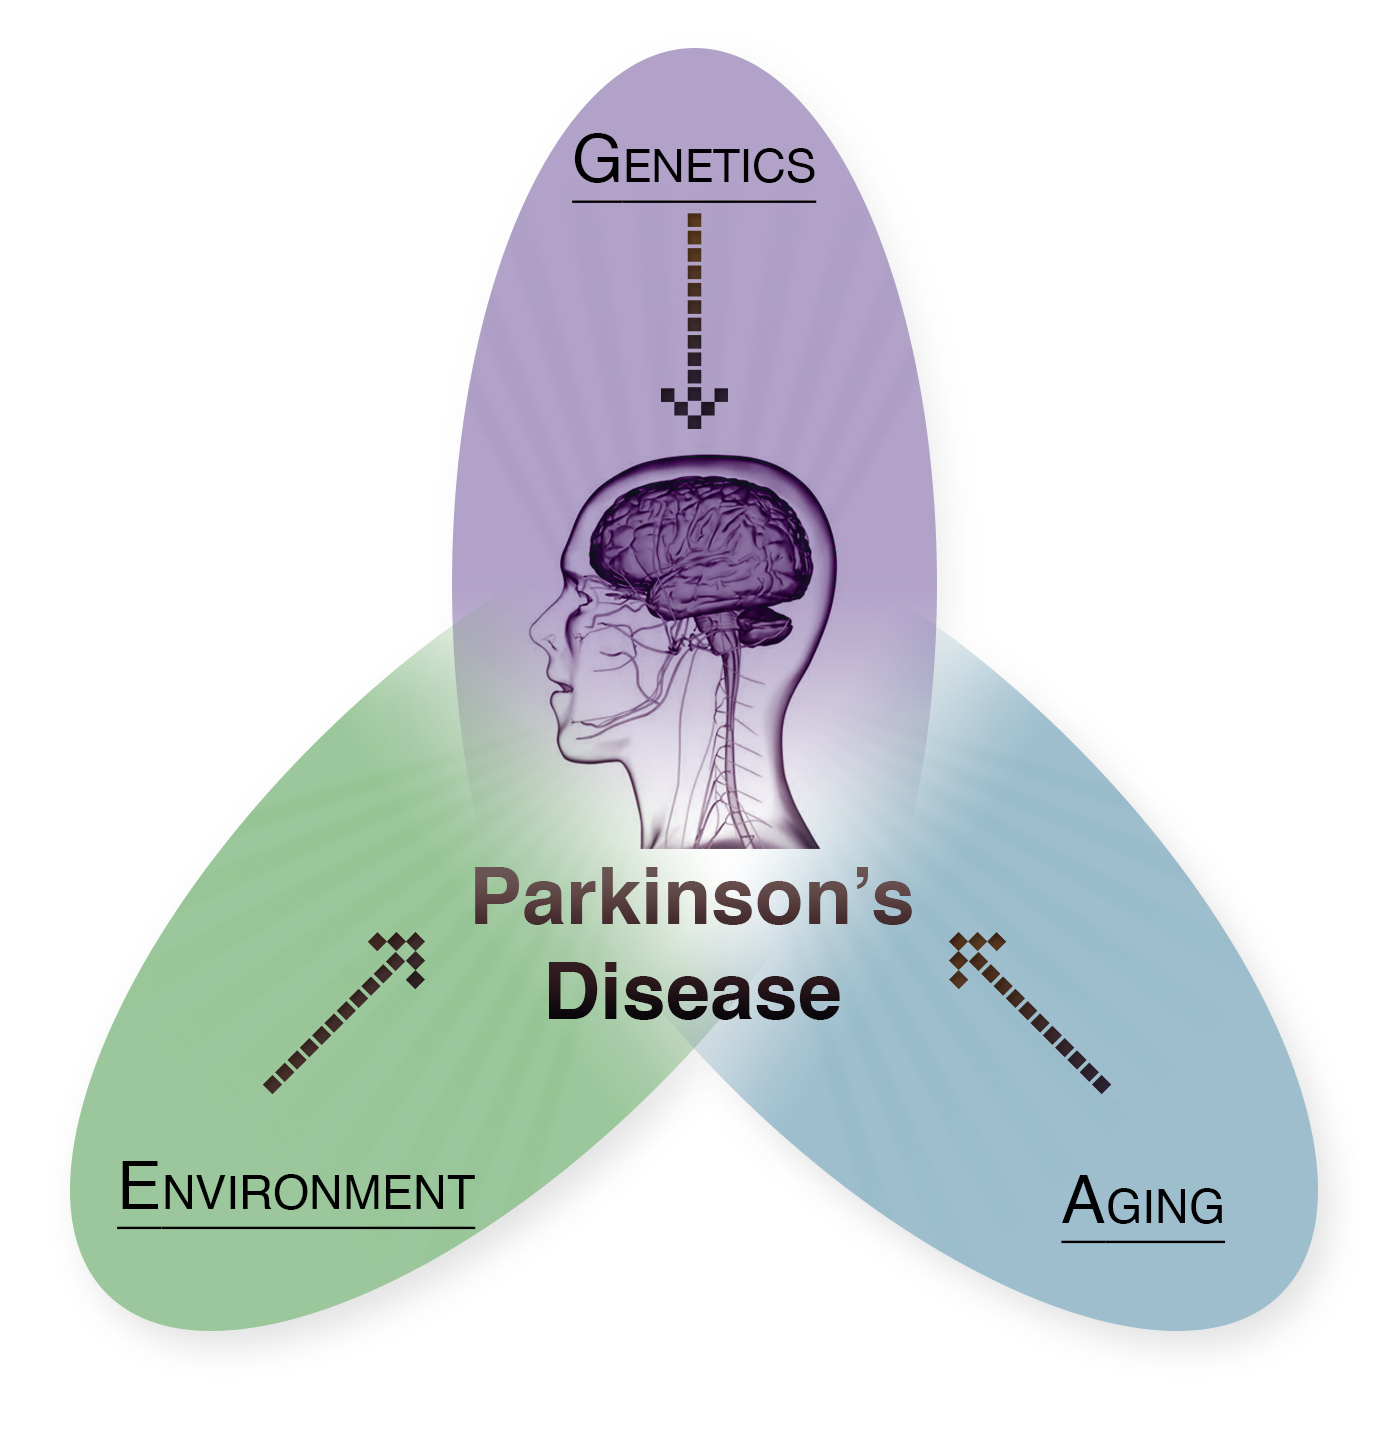 The figure shows a tripartite venn diagram with a central head, below the text Parkinson´s disease, and the factors which influence the onset and development of the disease, namely genetics, environment and aging.